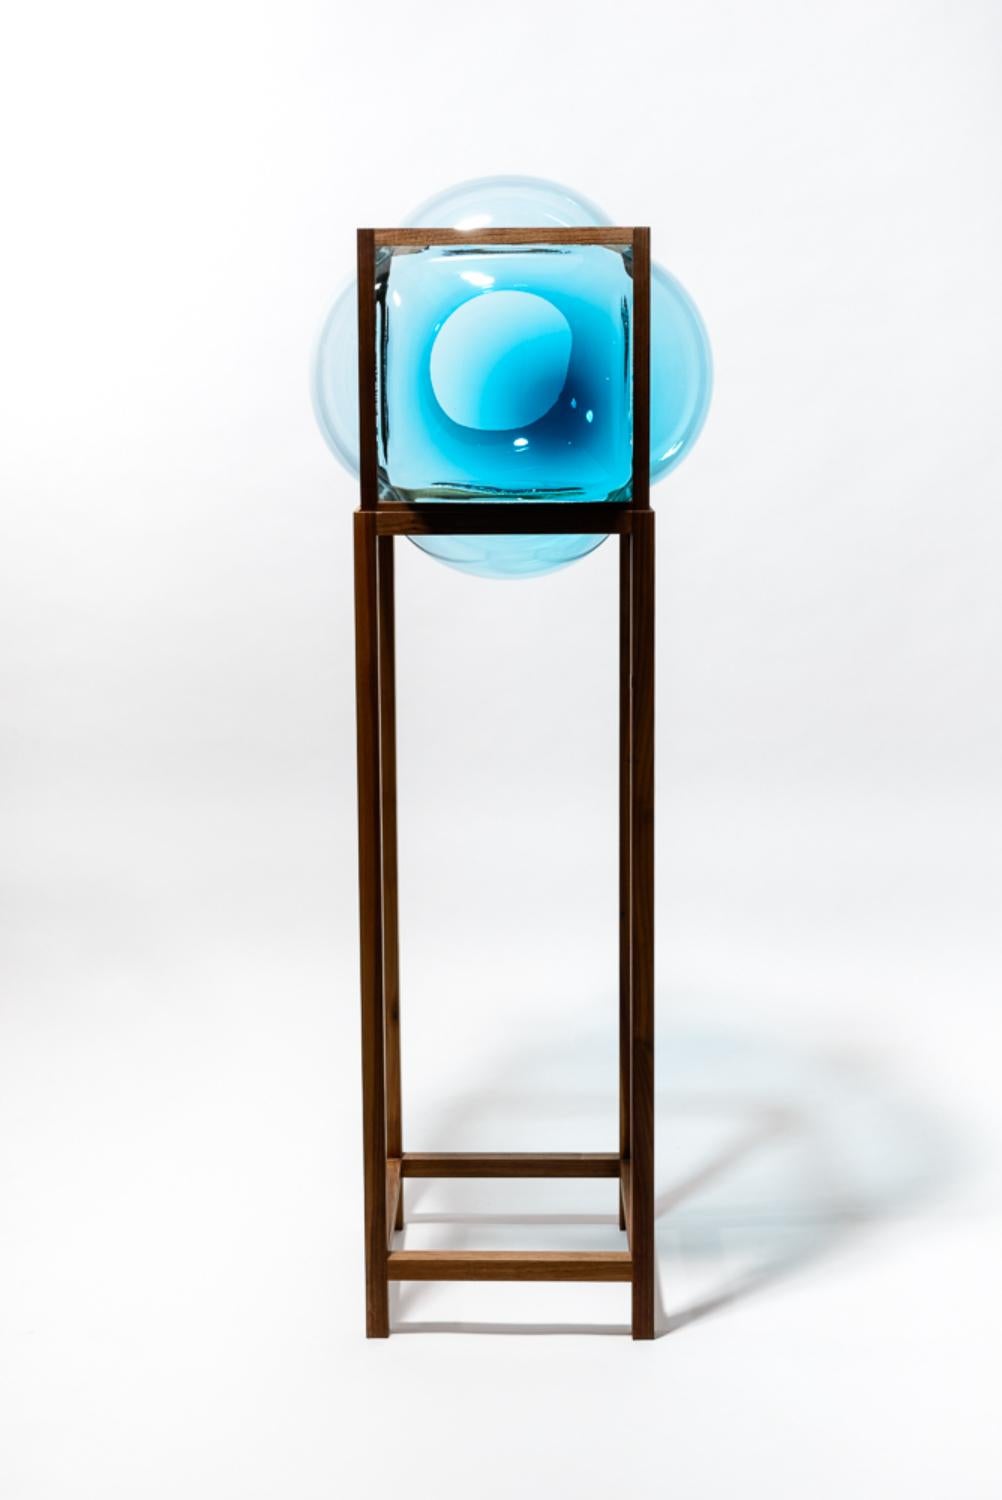 High round square cabinet by Studio Thier & van Daalen
Dimensions: W 45 x D 45 x H 120cm
Materials: Wood, Glass
Also Available: Other options available.

When blowing soap bubbles in the air Iris & Ruben had the dream to capture these temporary